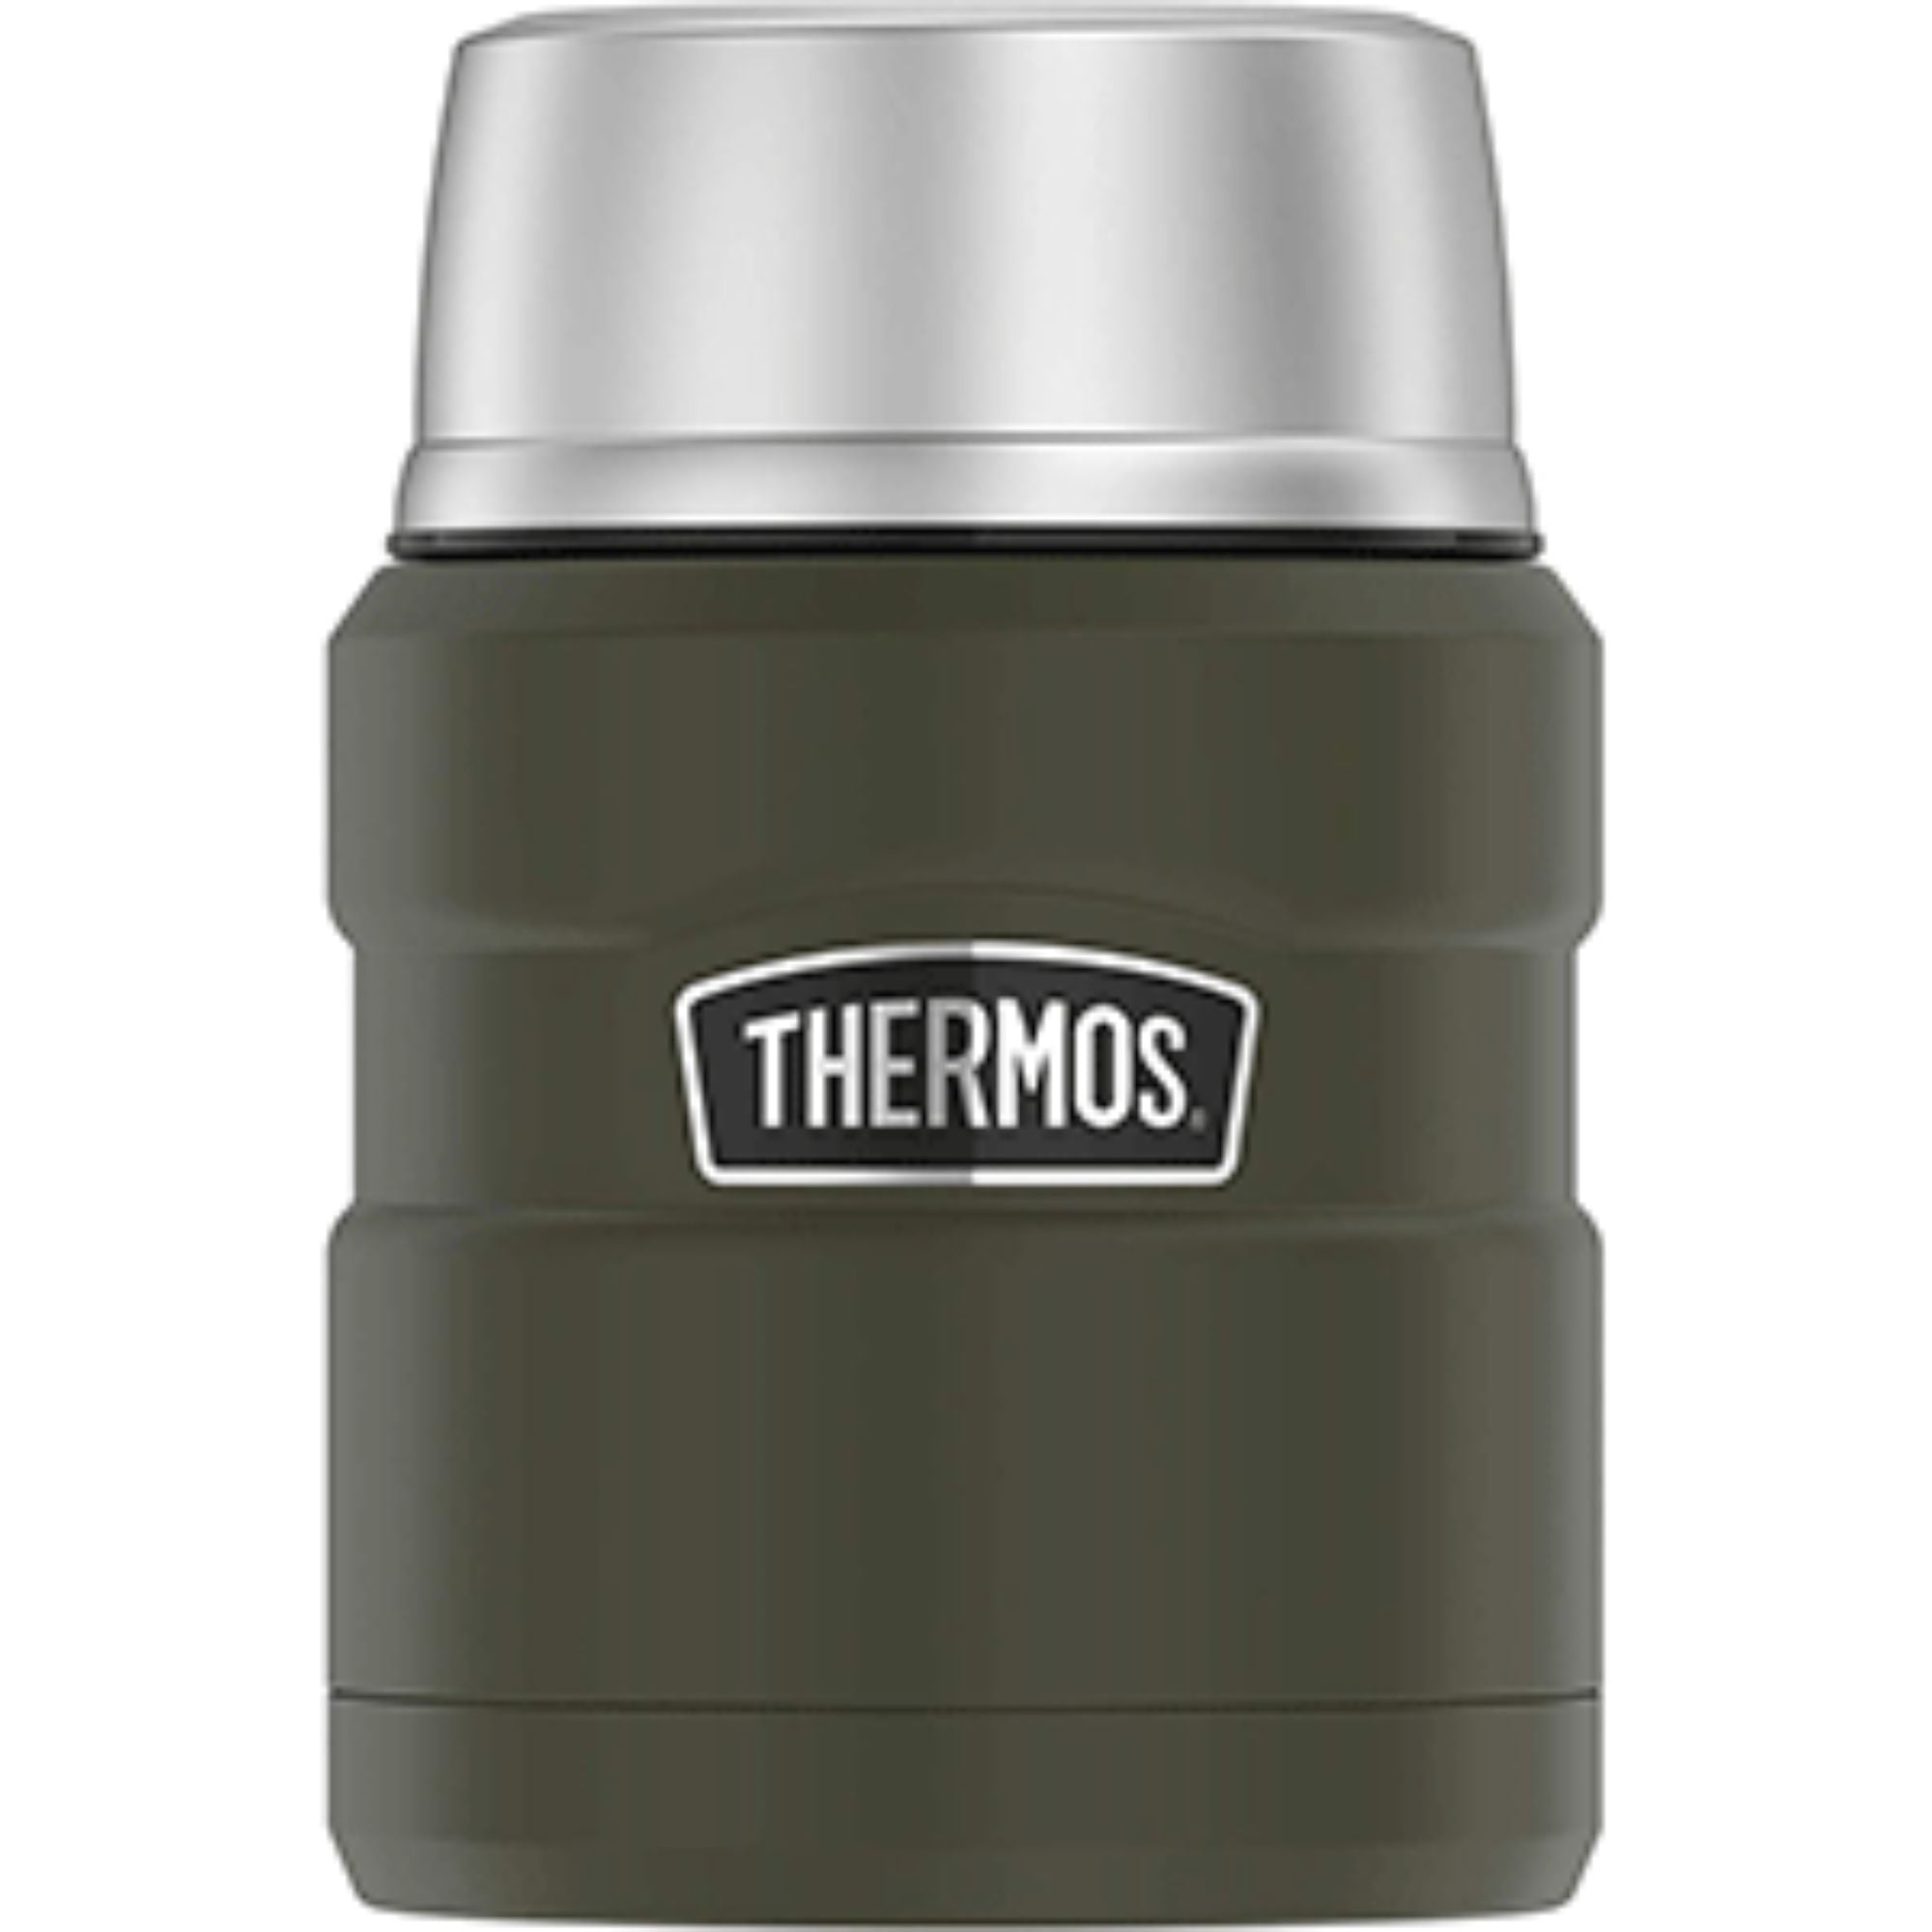 is thermos microwavable